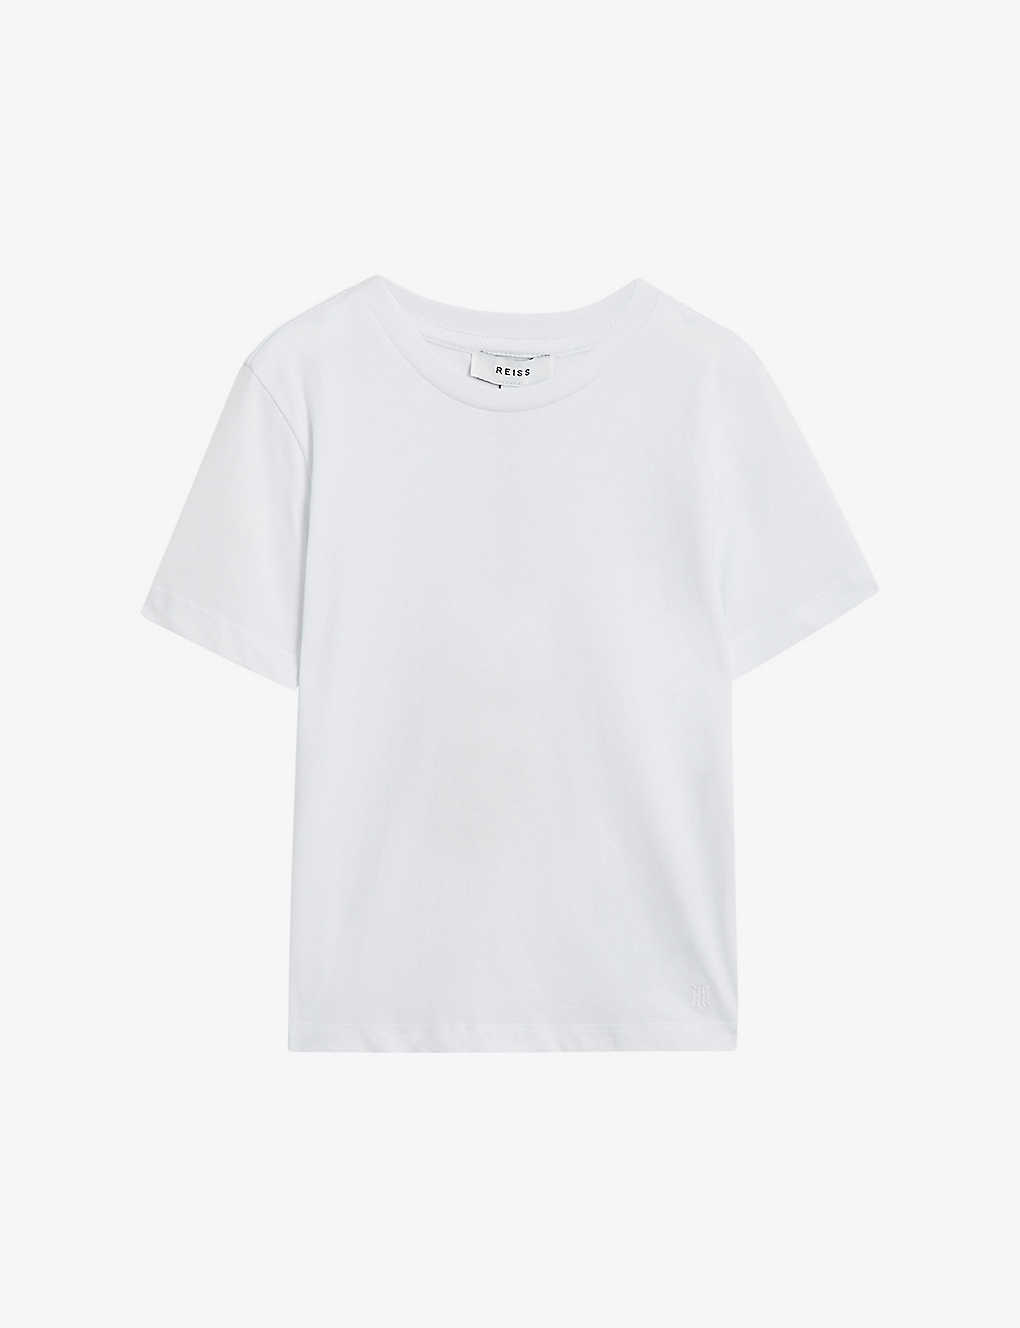 Reiss Kids' Bless Crewneck Cotton-jersey T-shirt 3-14 Years In White